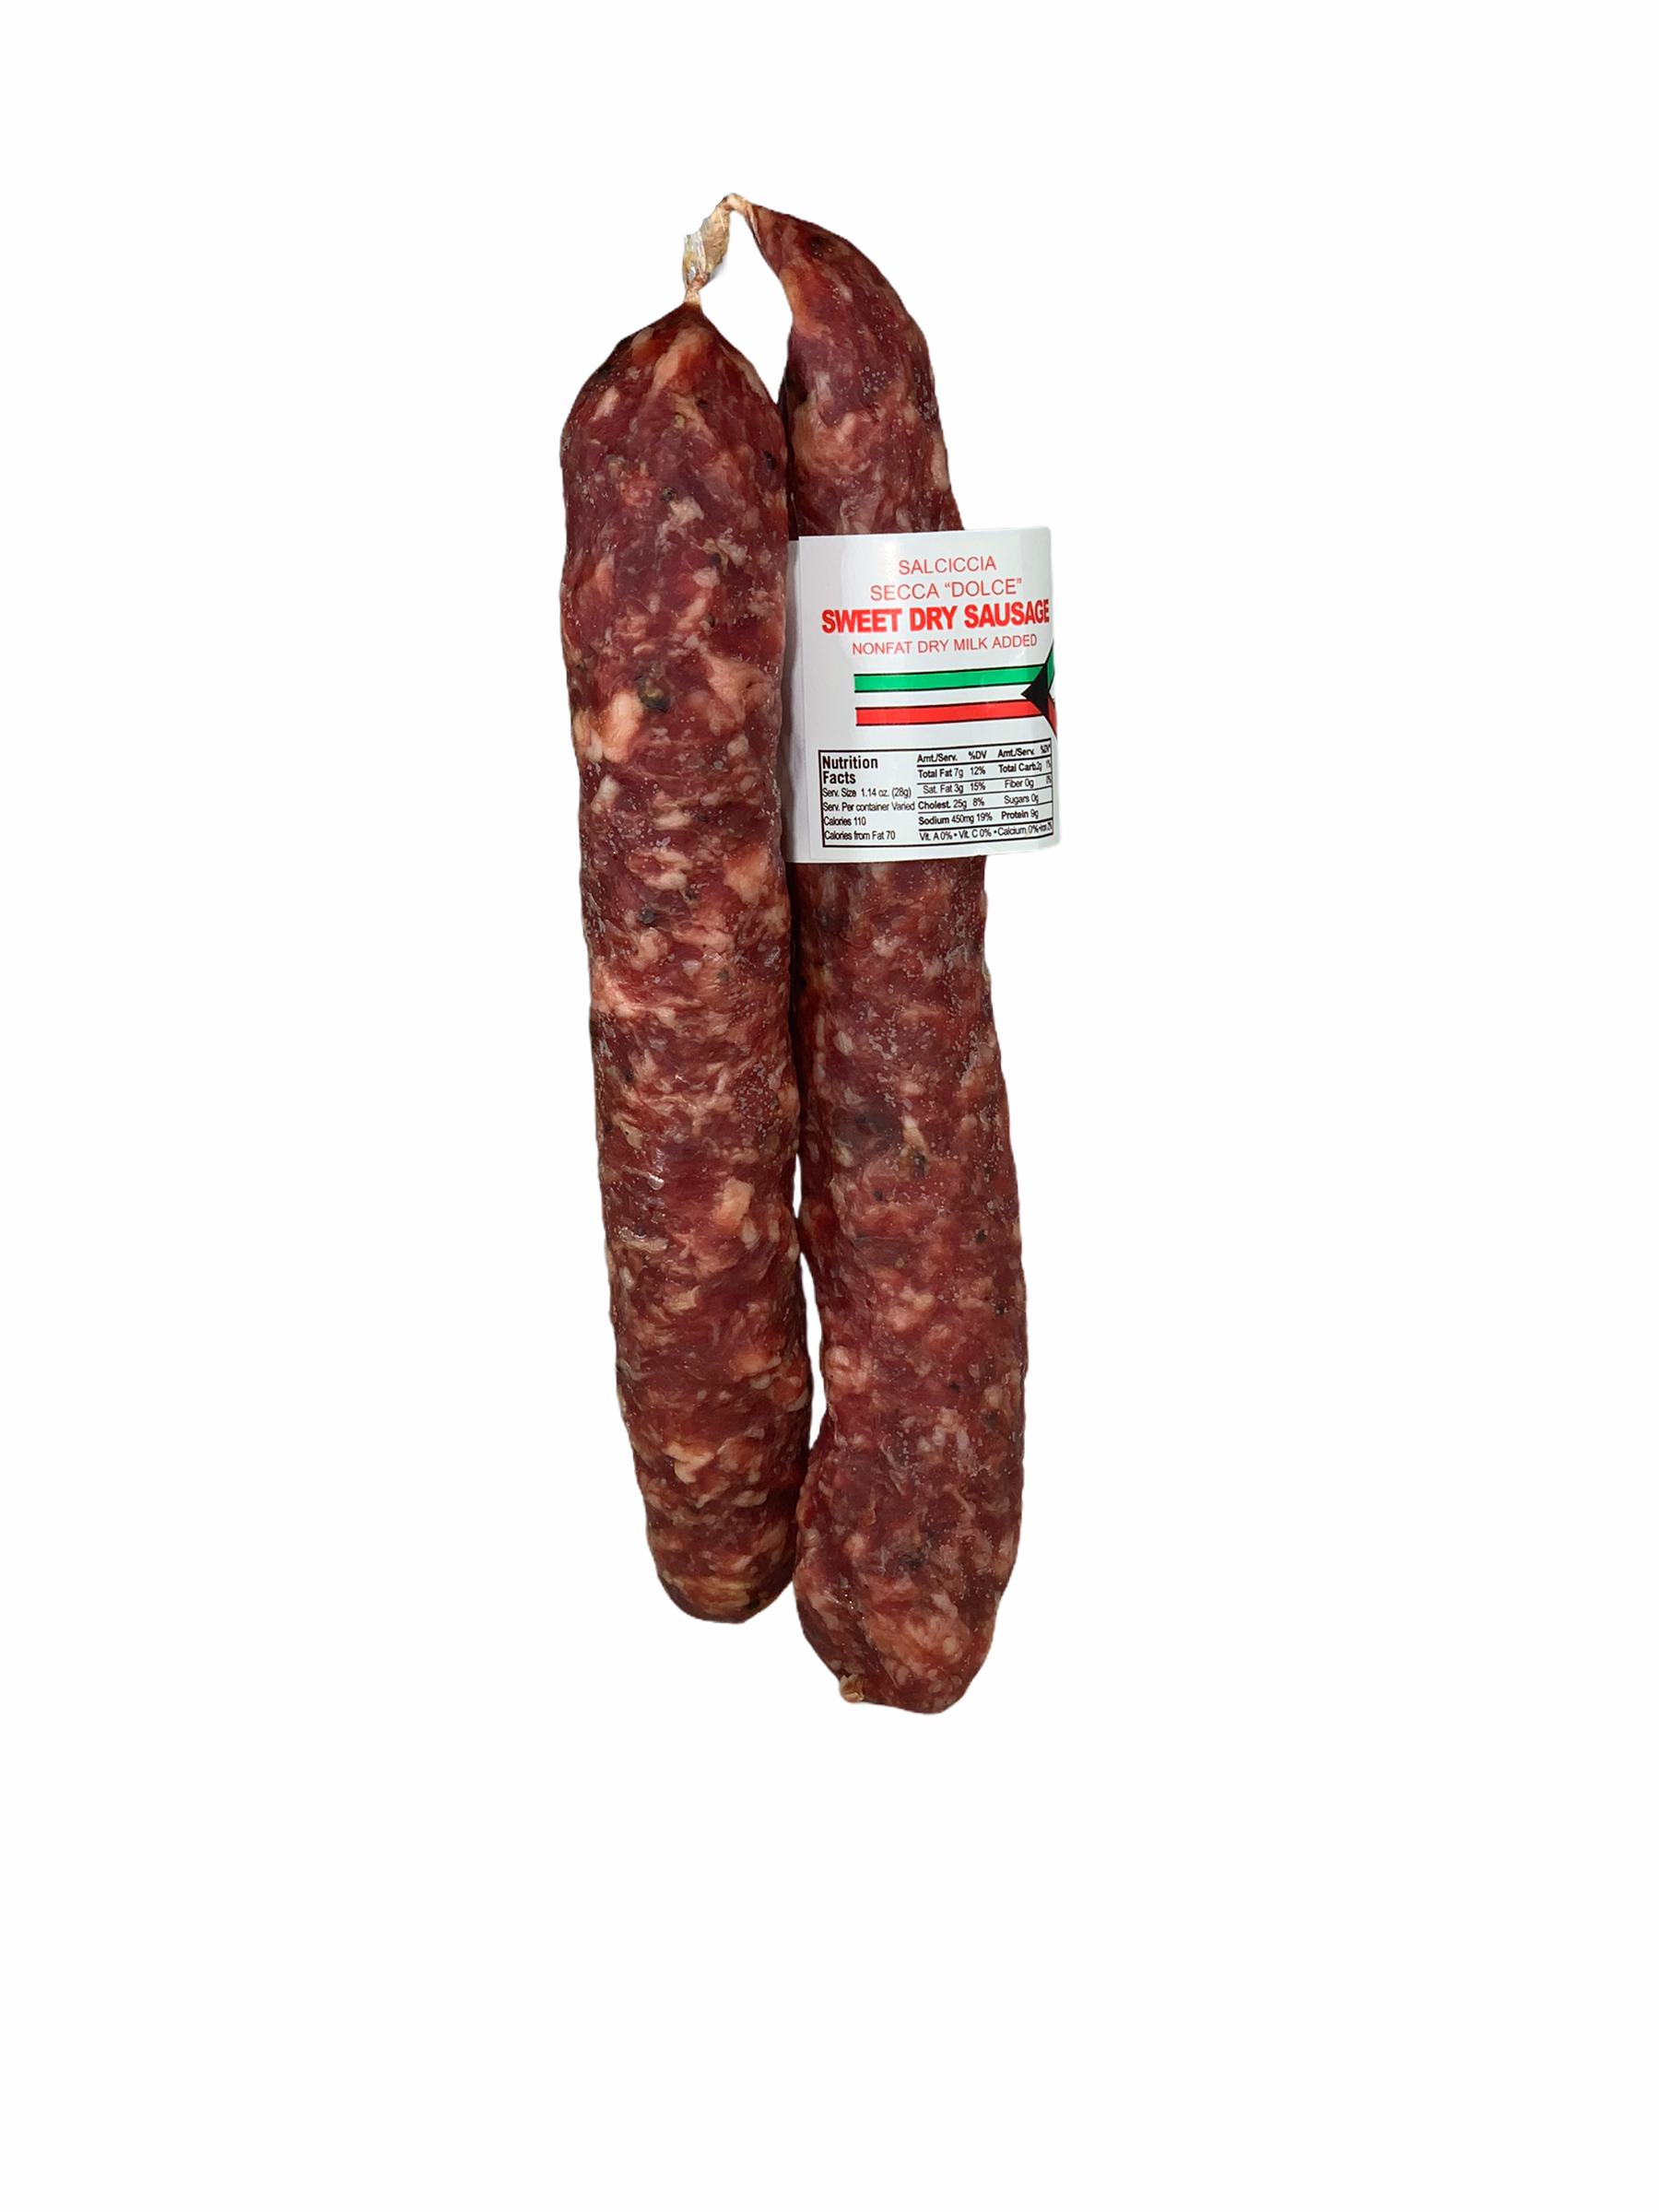 Sweet Dry Sausage Alps, two links,approximately 1 Lb